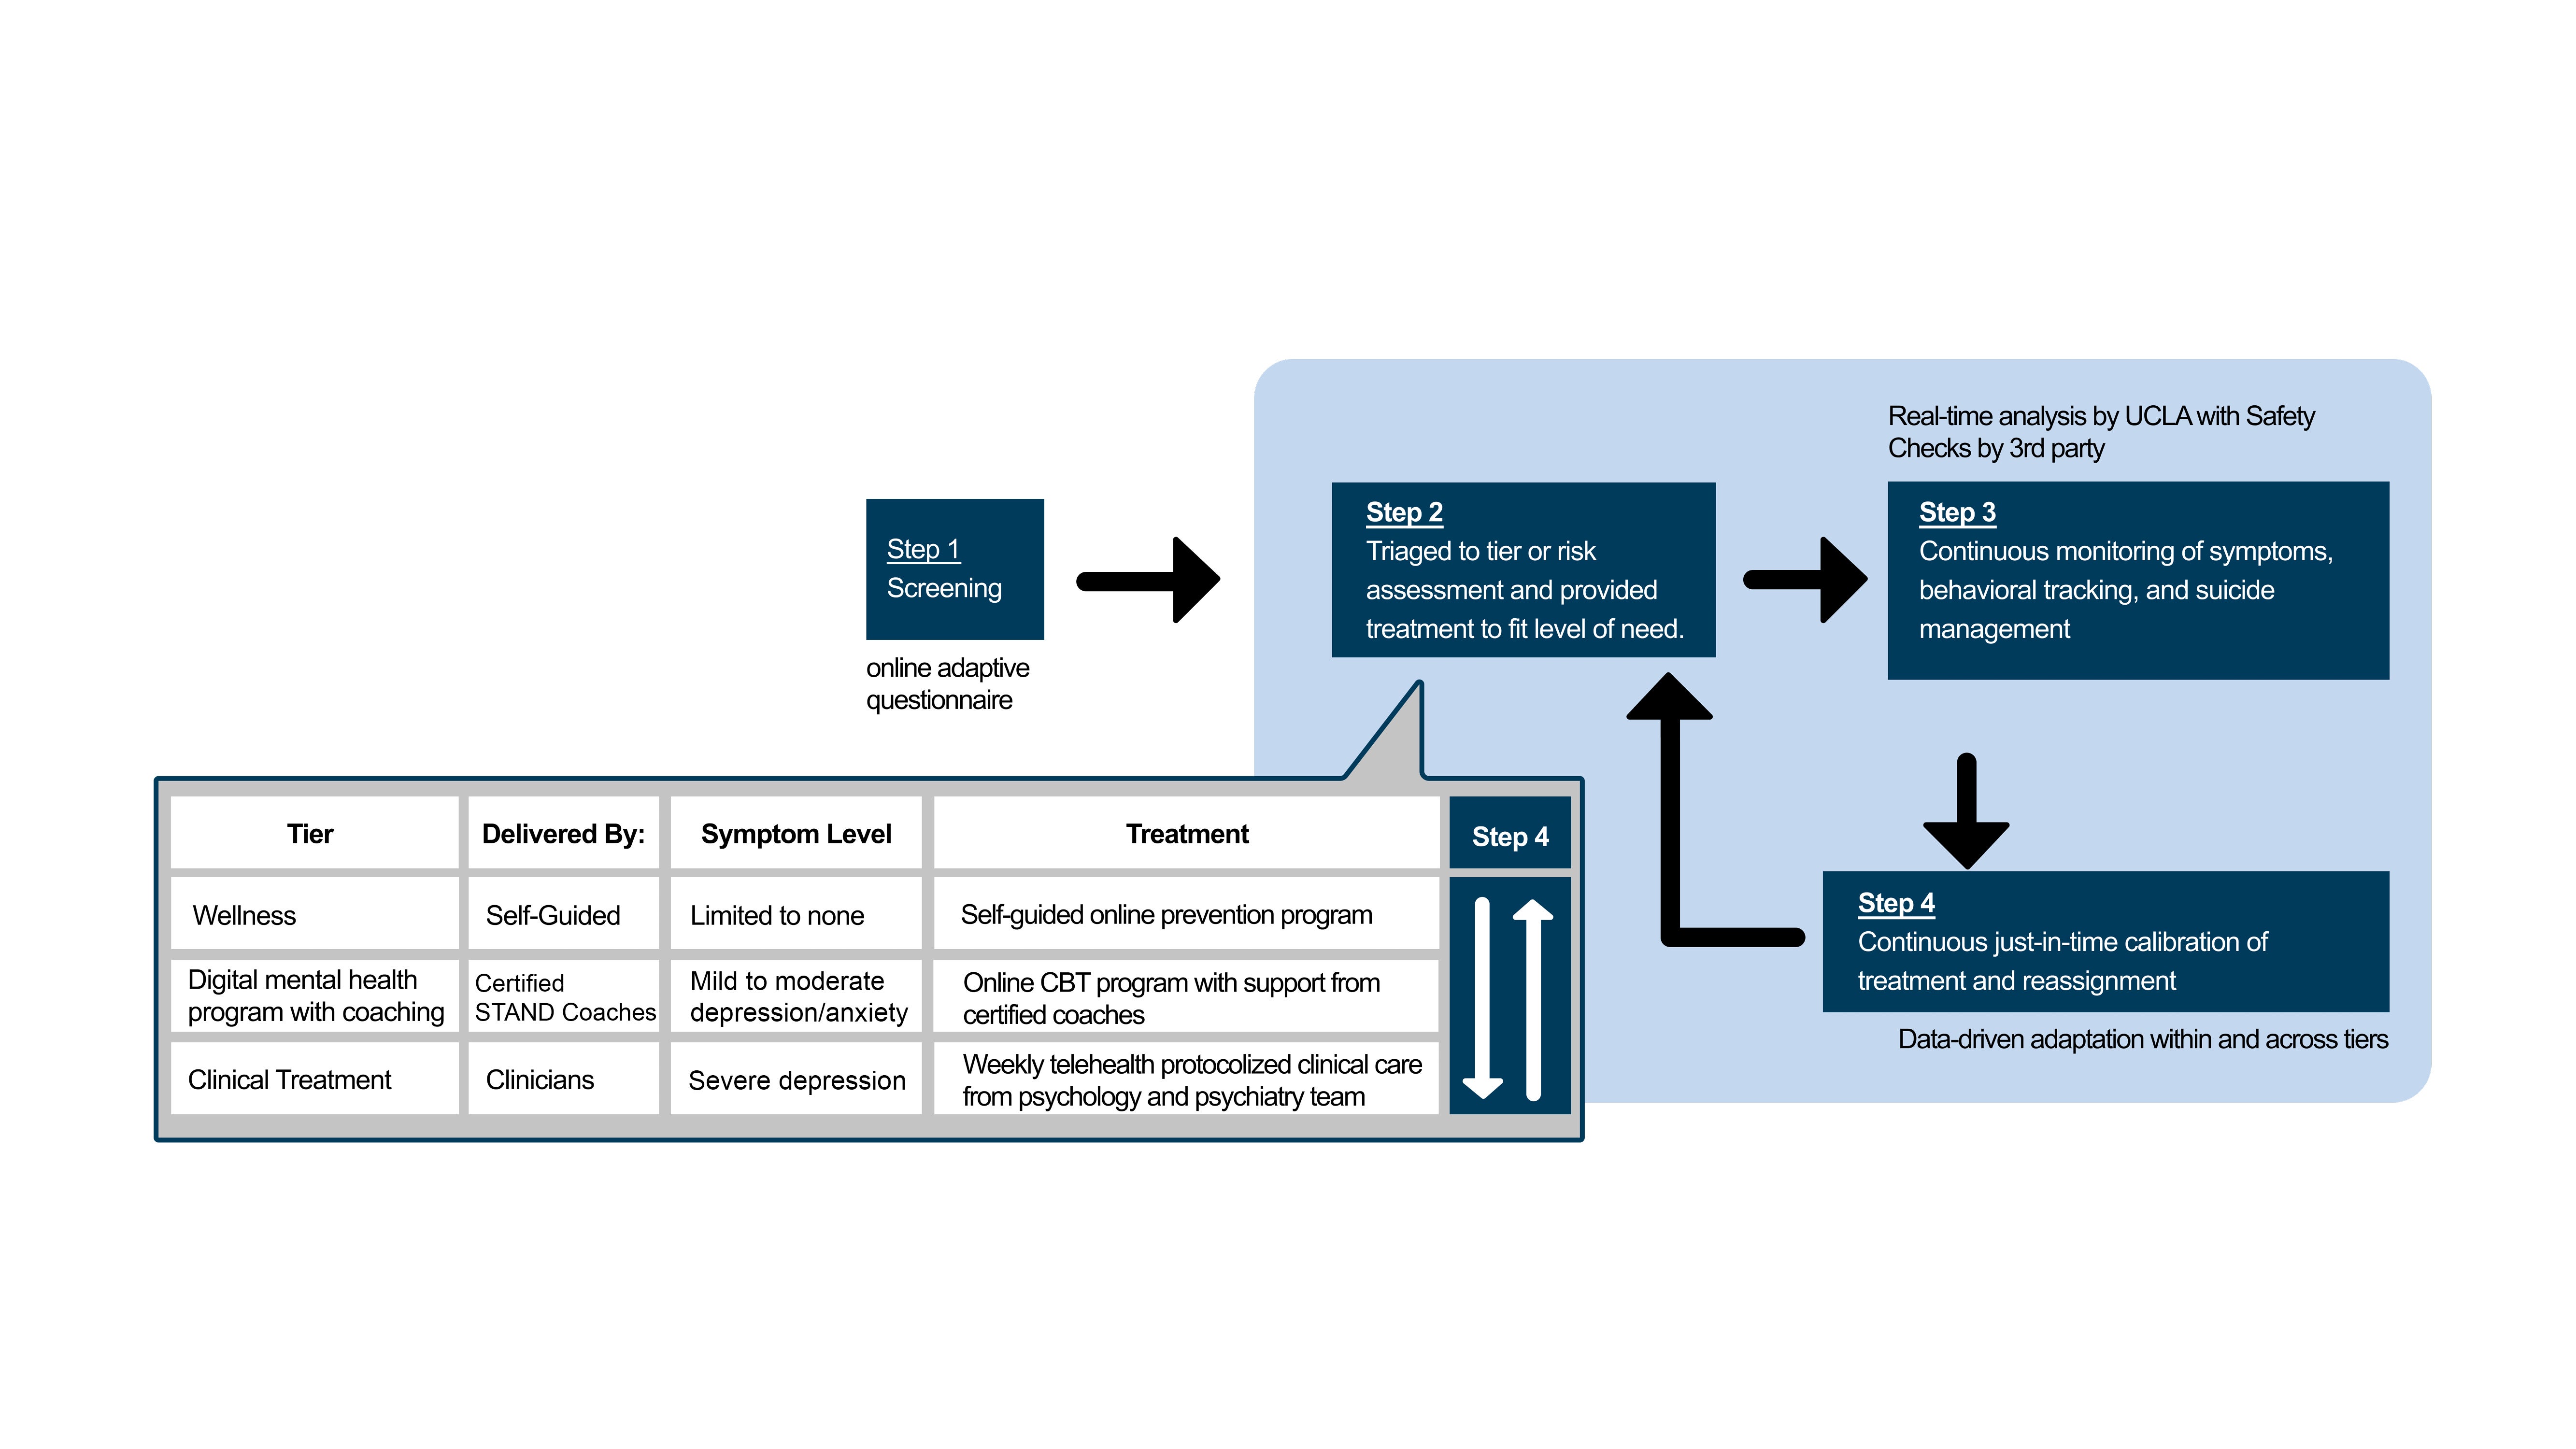 A flow chart displays the STAND system of care: step 1 is screening, step 2 is triaging to appropriate level of care, step 3 is continuous monitoring of symptoms, and step 4 is continuous calibration of treatment and reassignment. 